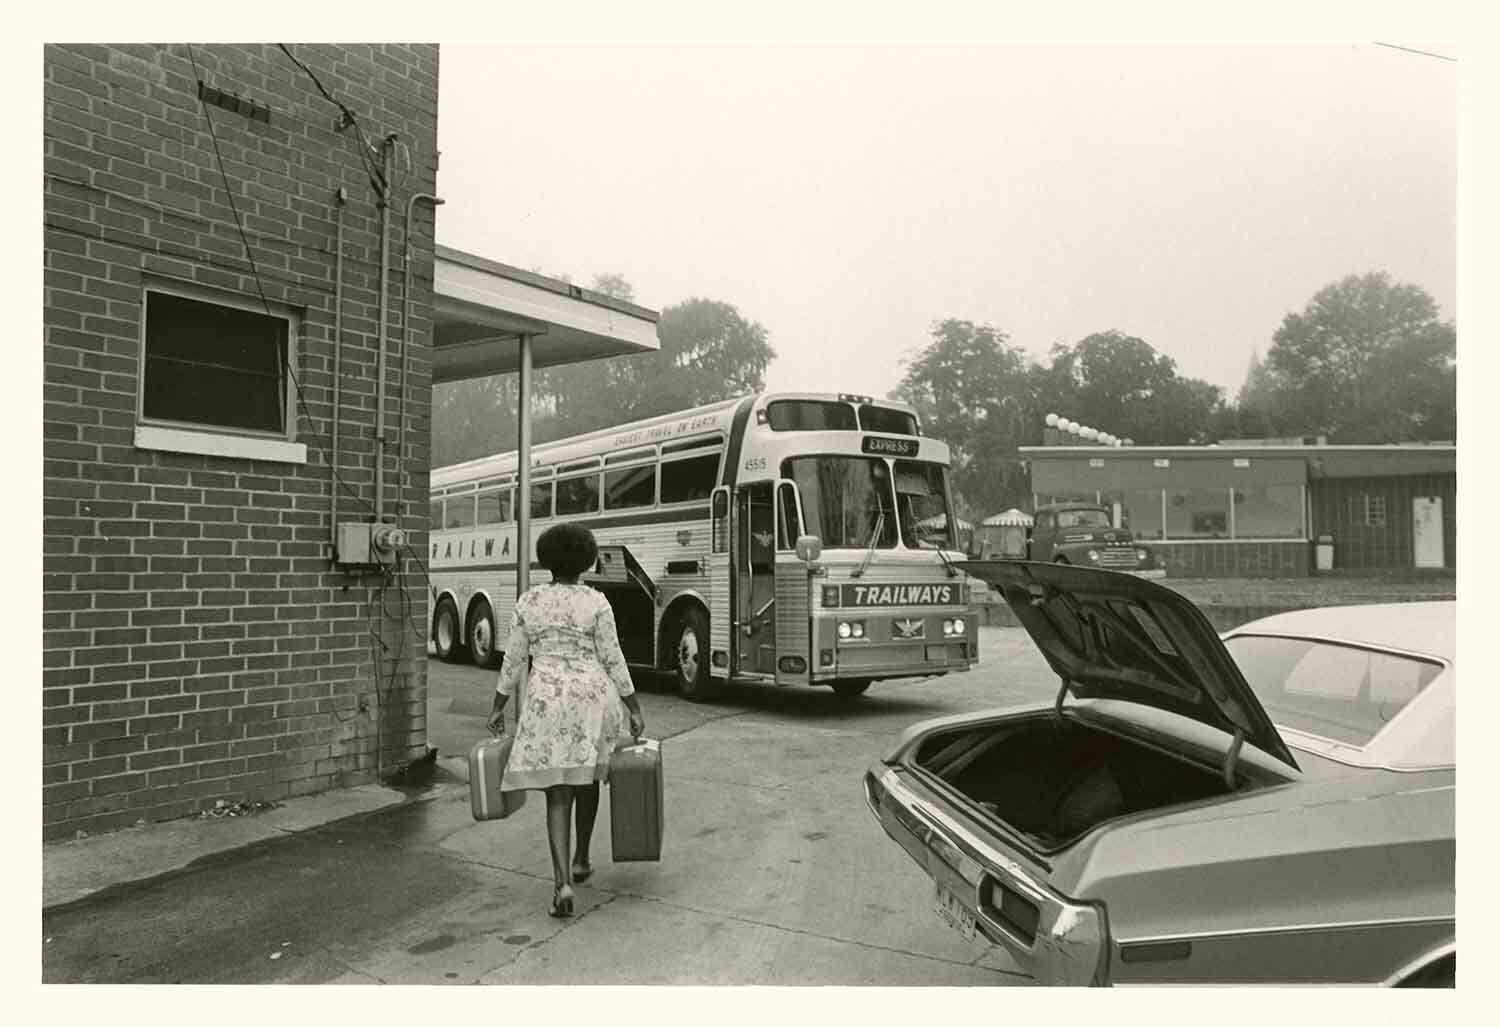   Trailways Bus Station , 1977 Silver Gelatin Print 5 5/8 × 8 1/2 in. (image size) The Do Good Fund, Inc., 2015-65 